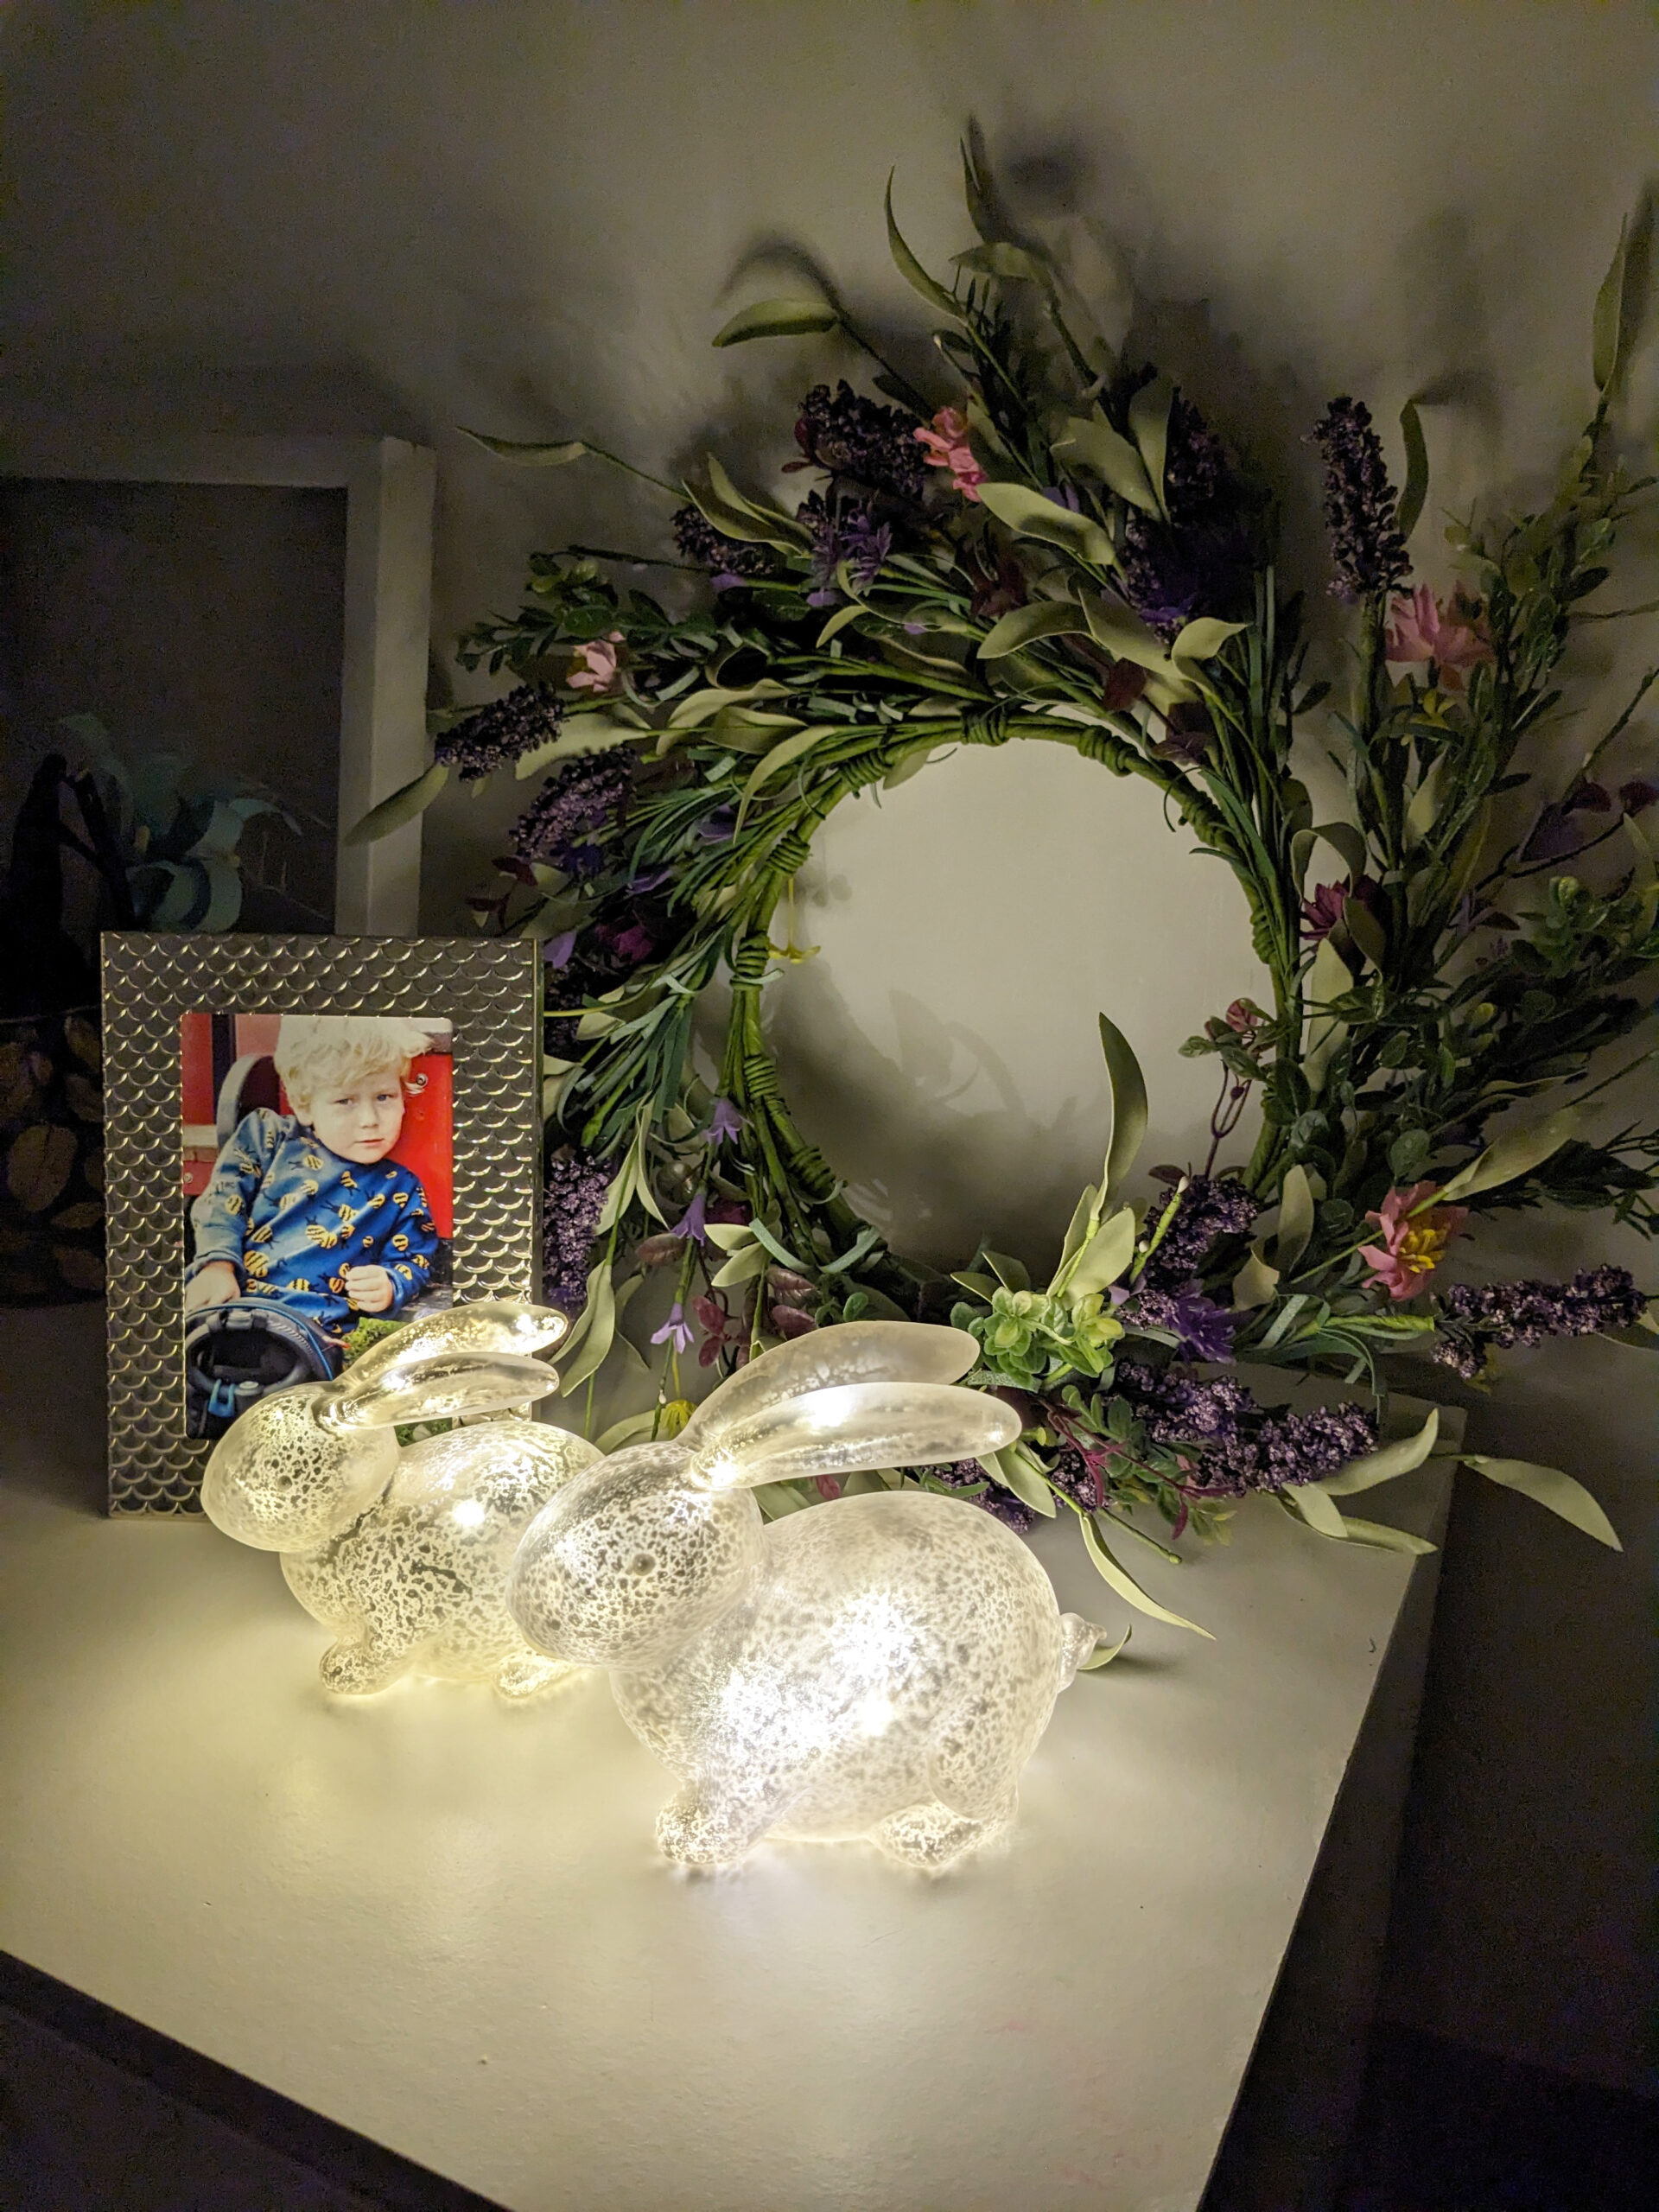 Get Your House Easter Ready, Lights, Lighting Solutions, Home & Interiors, Home, House Project, the Frenchie Mummy, Interiors, Lights4fun, Easy Ways To Get Your House Spring Ready